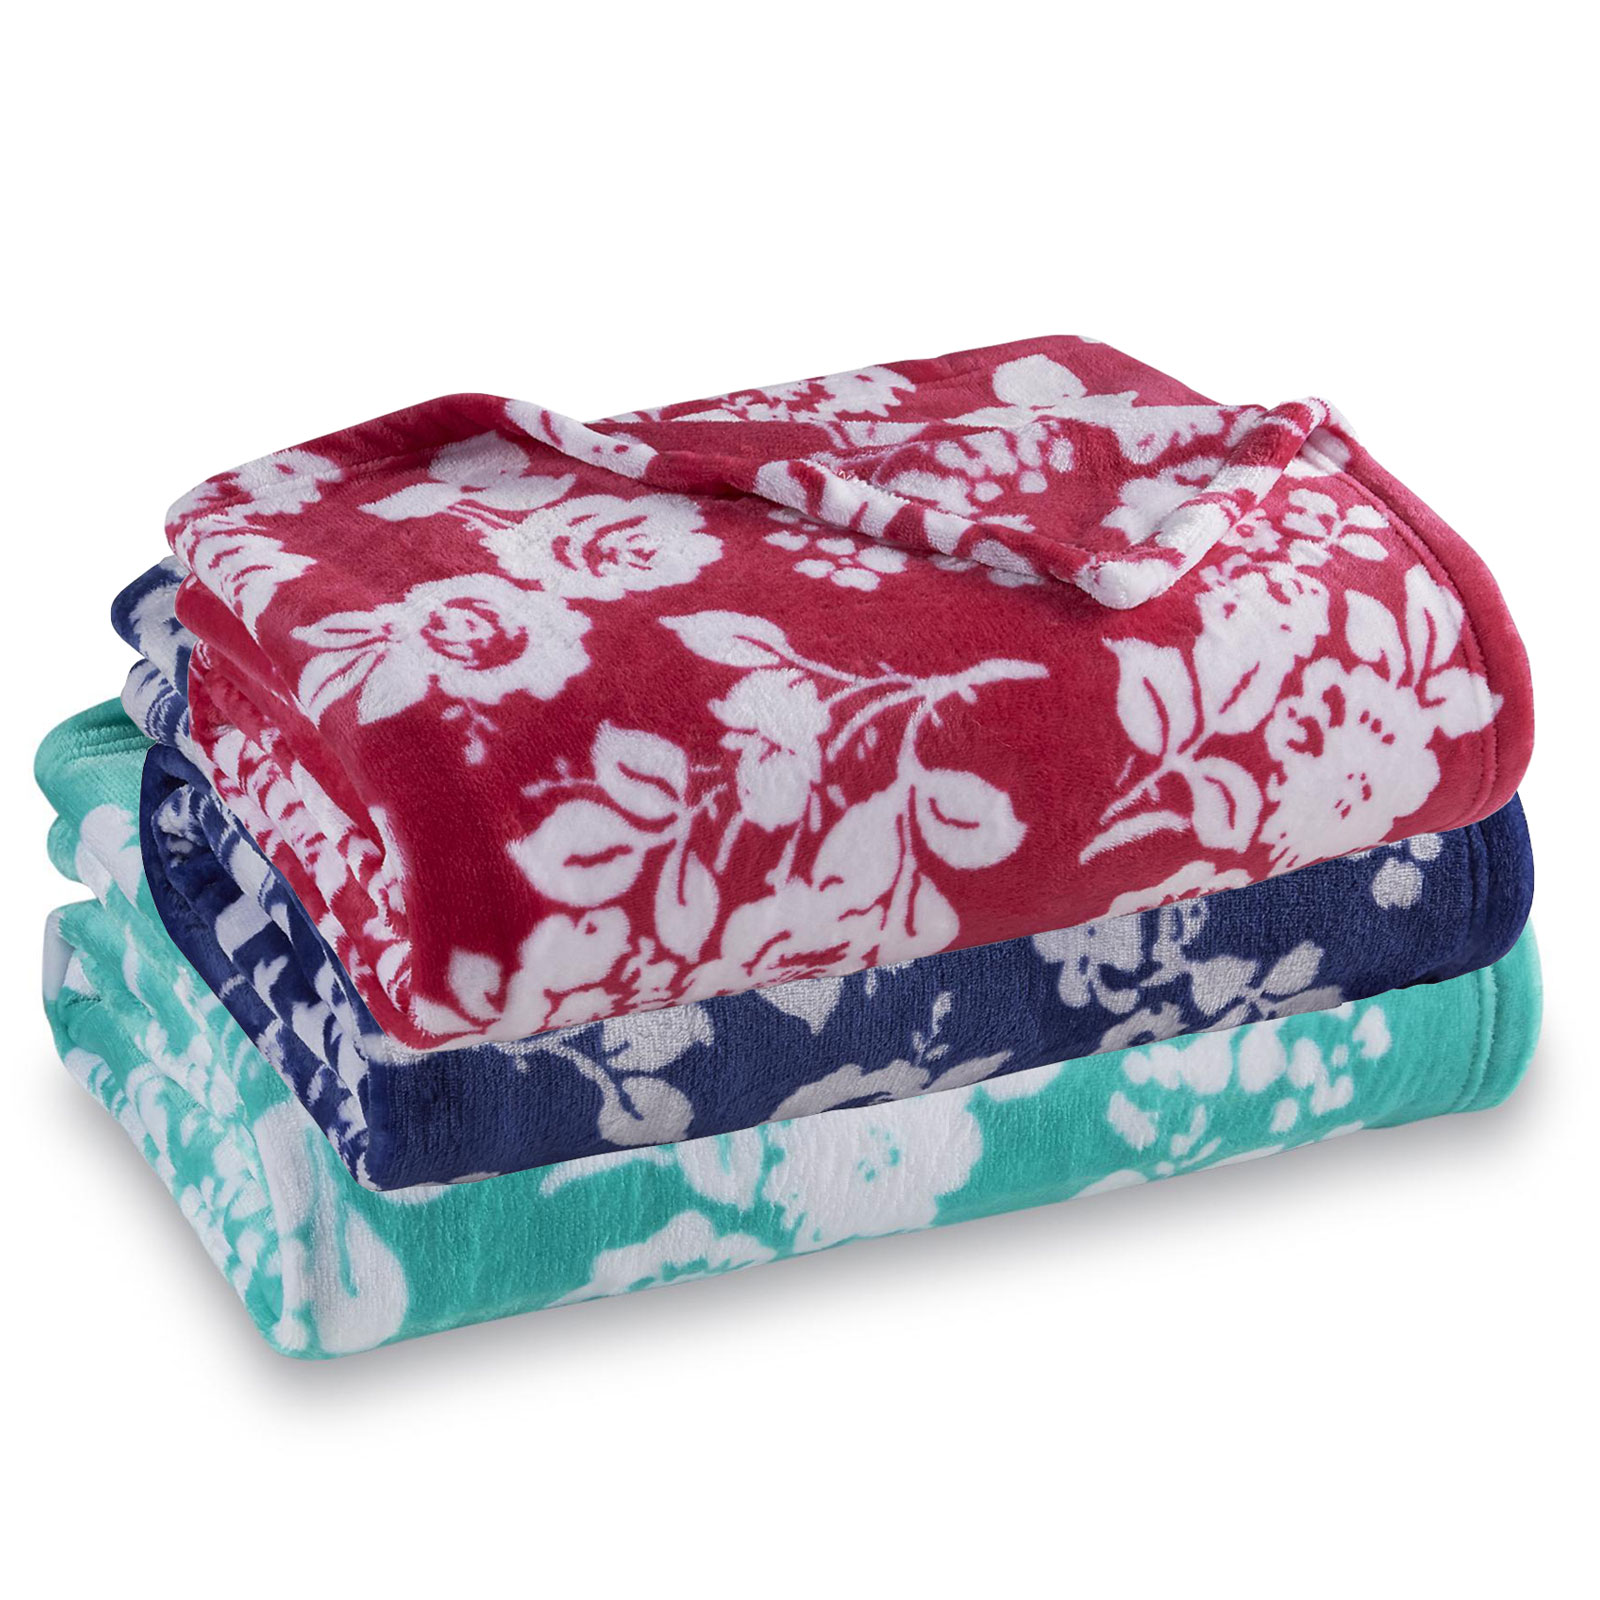 Colormate Floral Print Velvet Plush Throw Only $2.89 After SYWR Points!